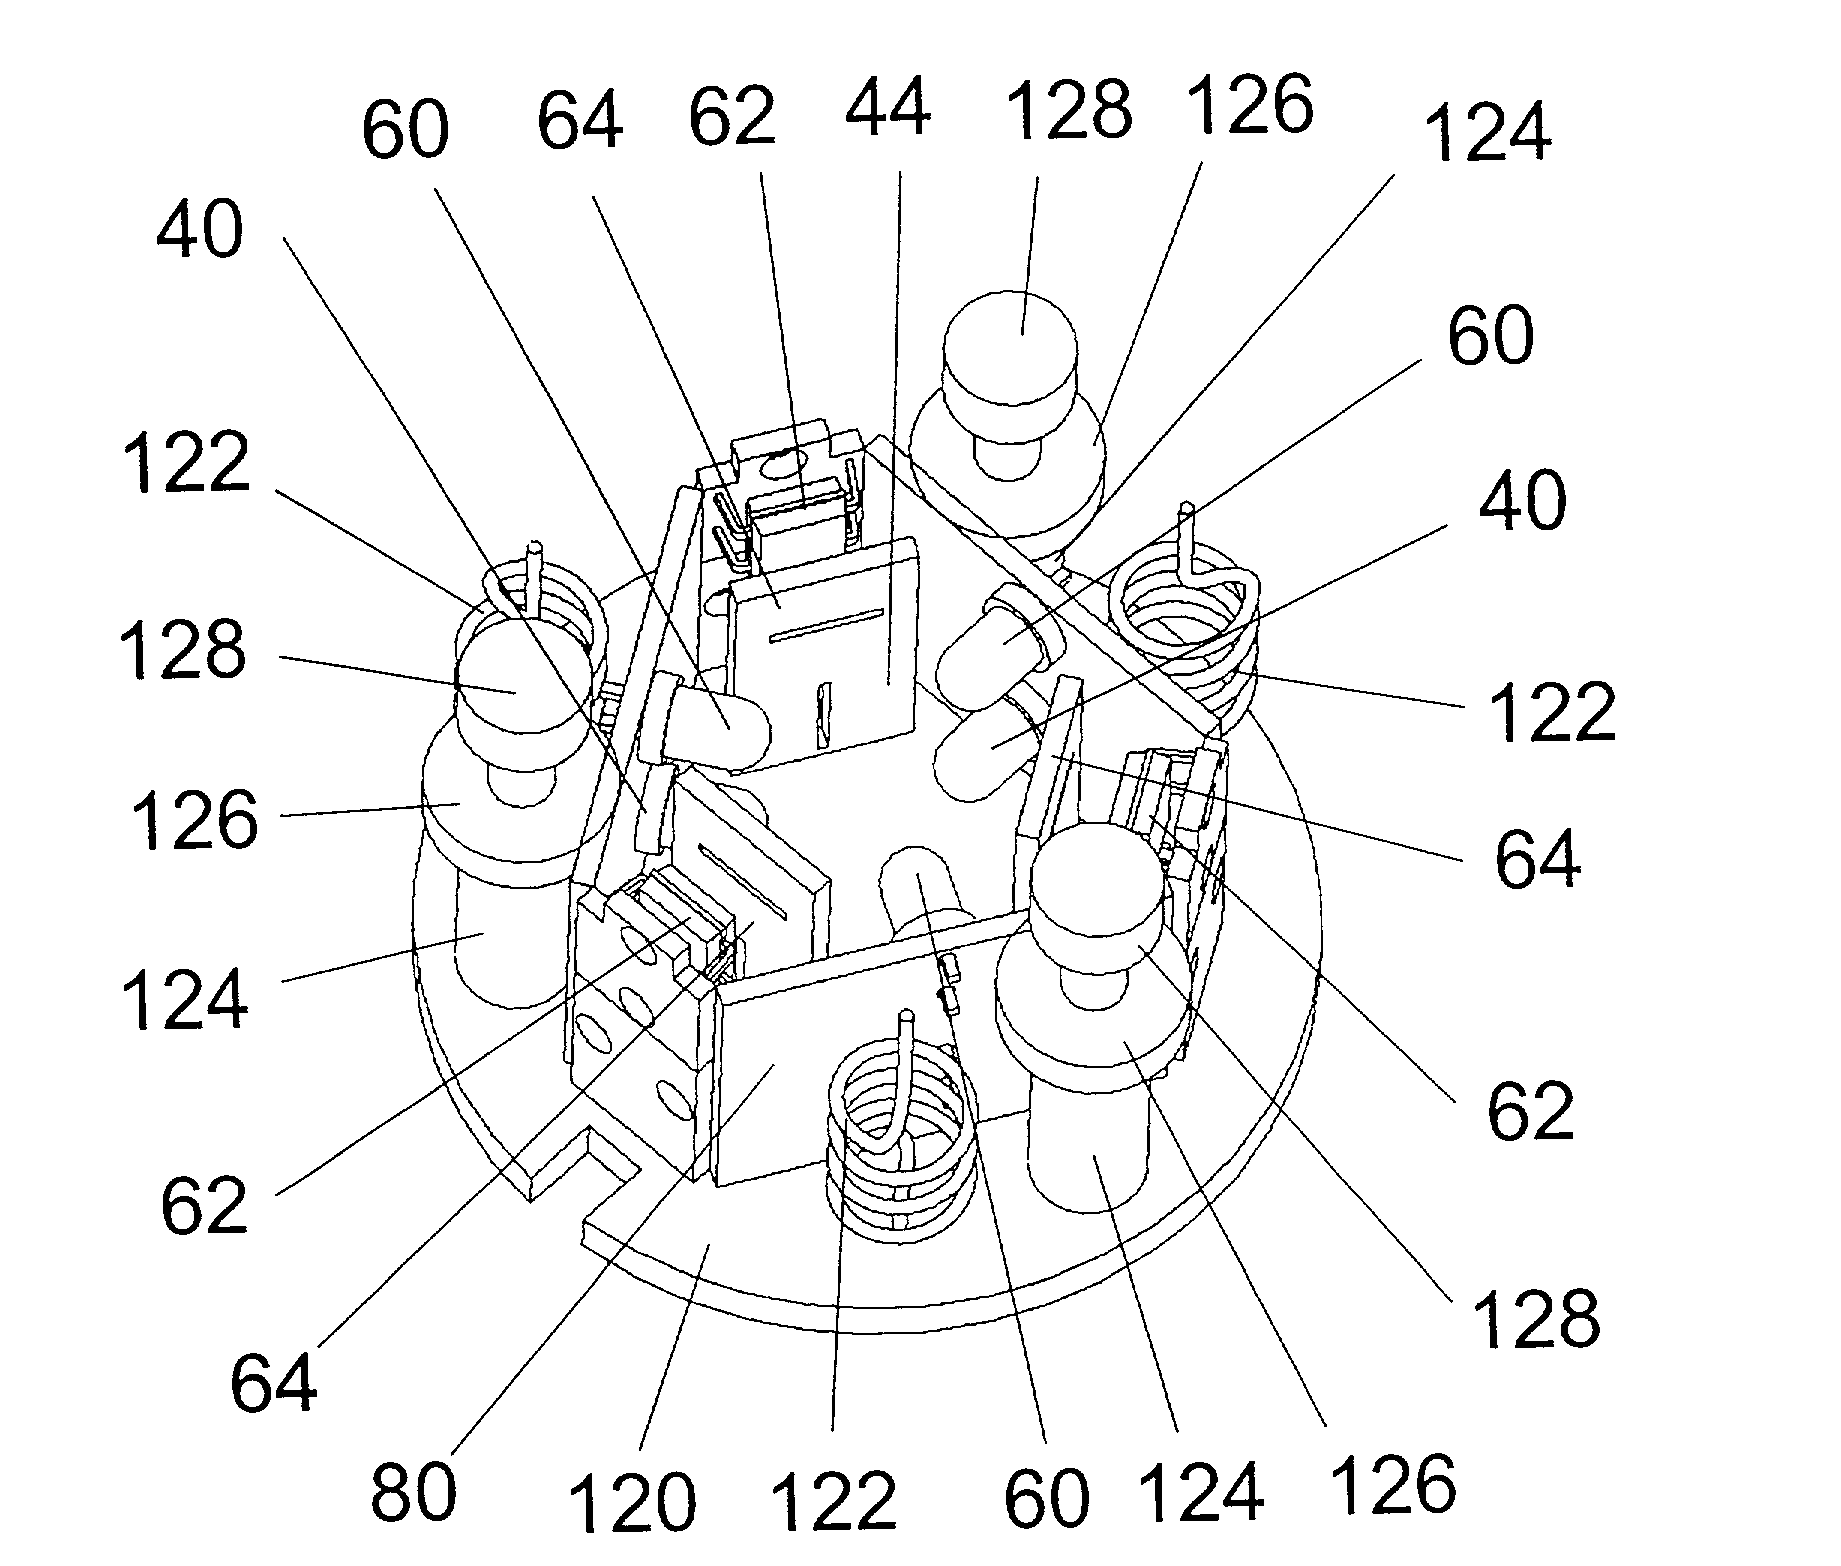 Arrangement for the detection for relative movements or relative position of two objects